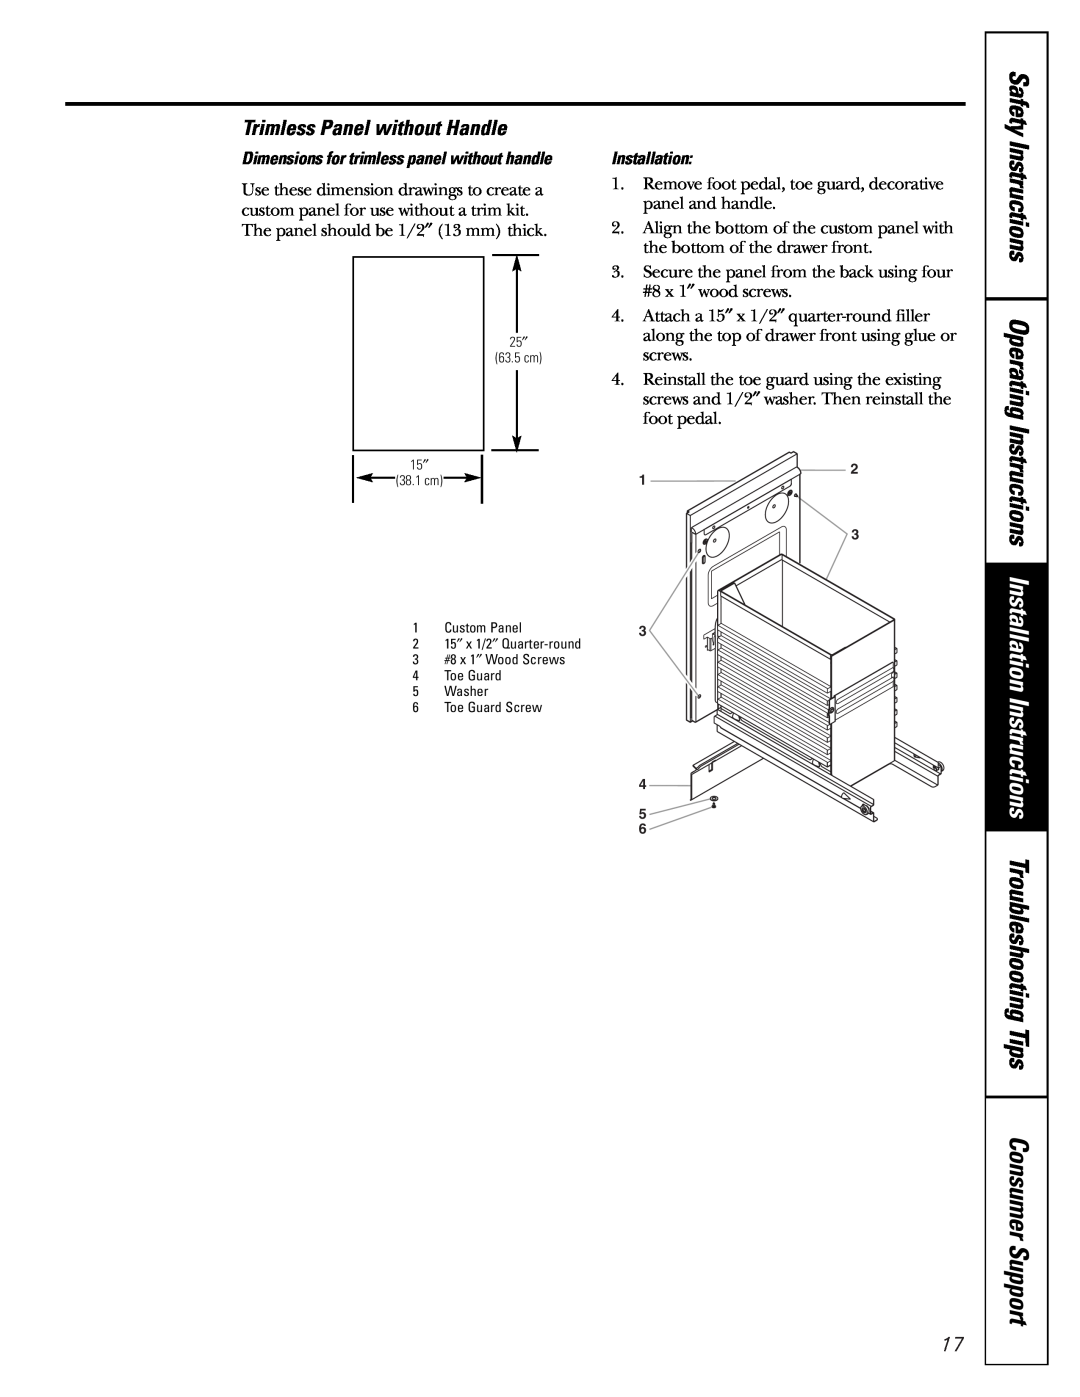 GE GCG1520 Trimless Panel without Handle, Safety Instructions Operating, Dimensions for trimless panel without handle 